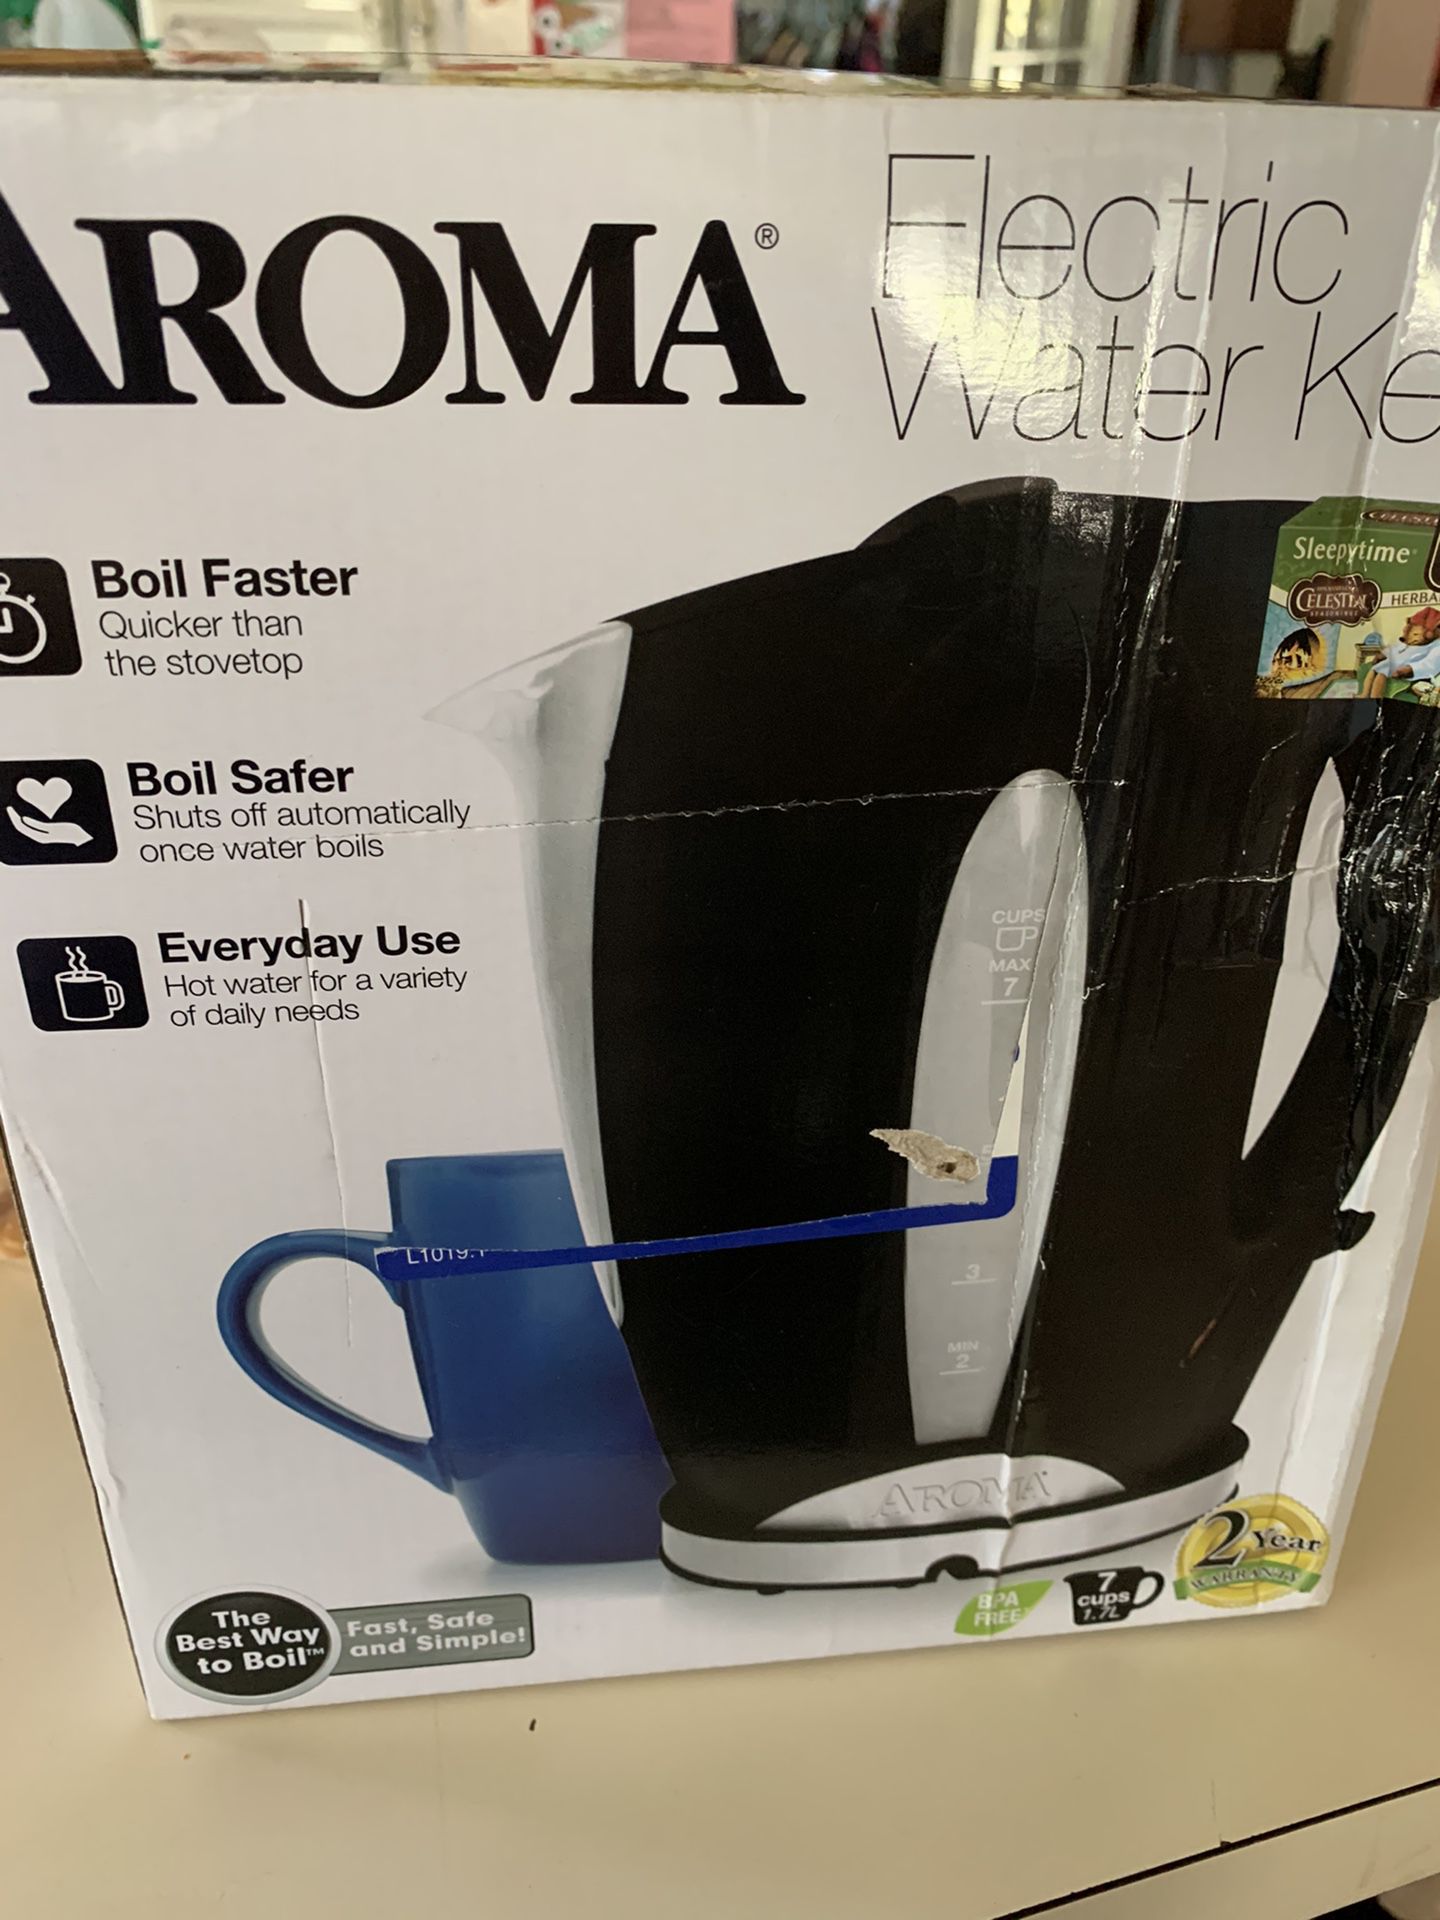 AROMA ELECTRIC WATER KETTLE